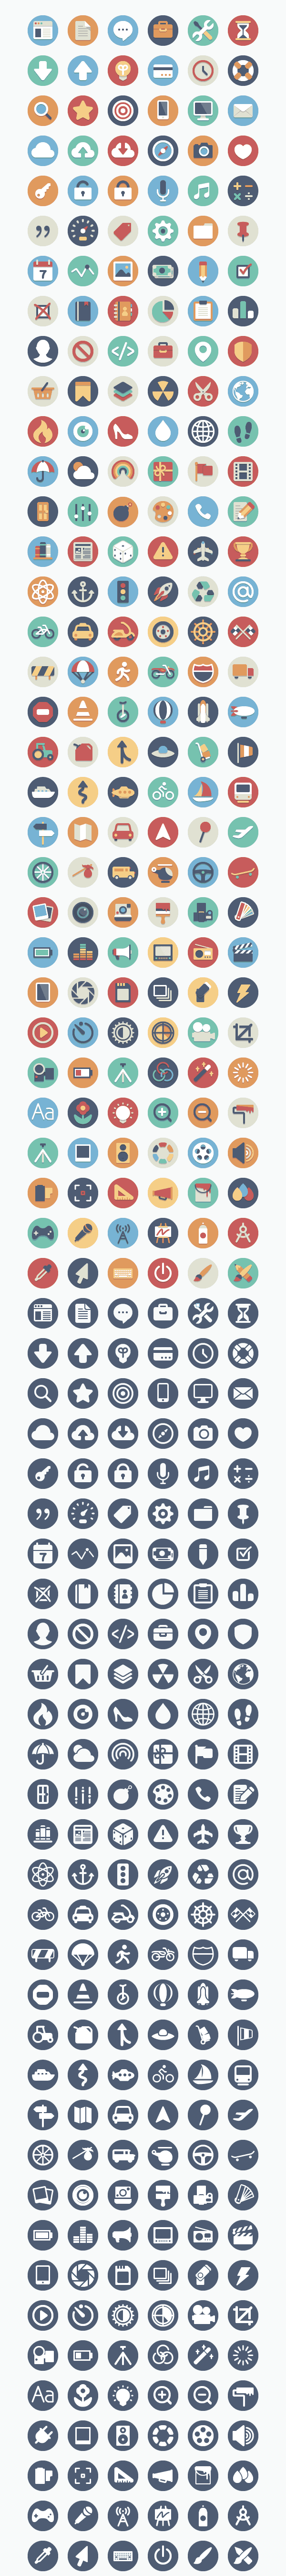 Catalogue Icon Vector Art, Icons, and Graphics for Free Download